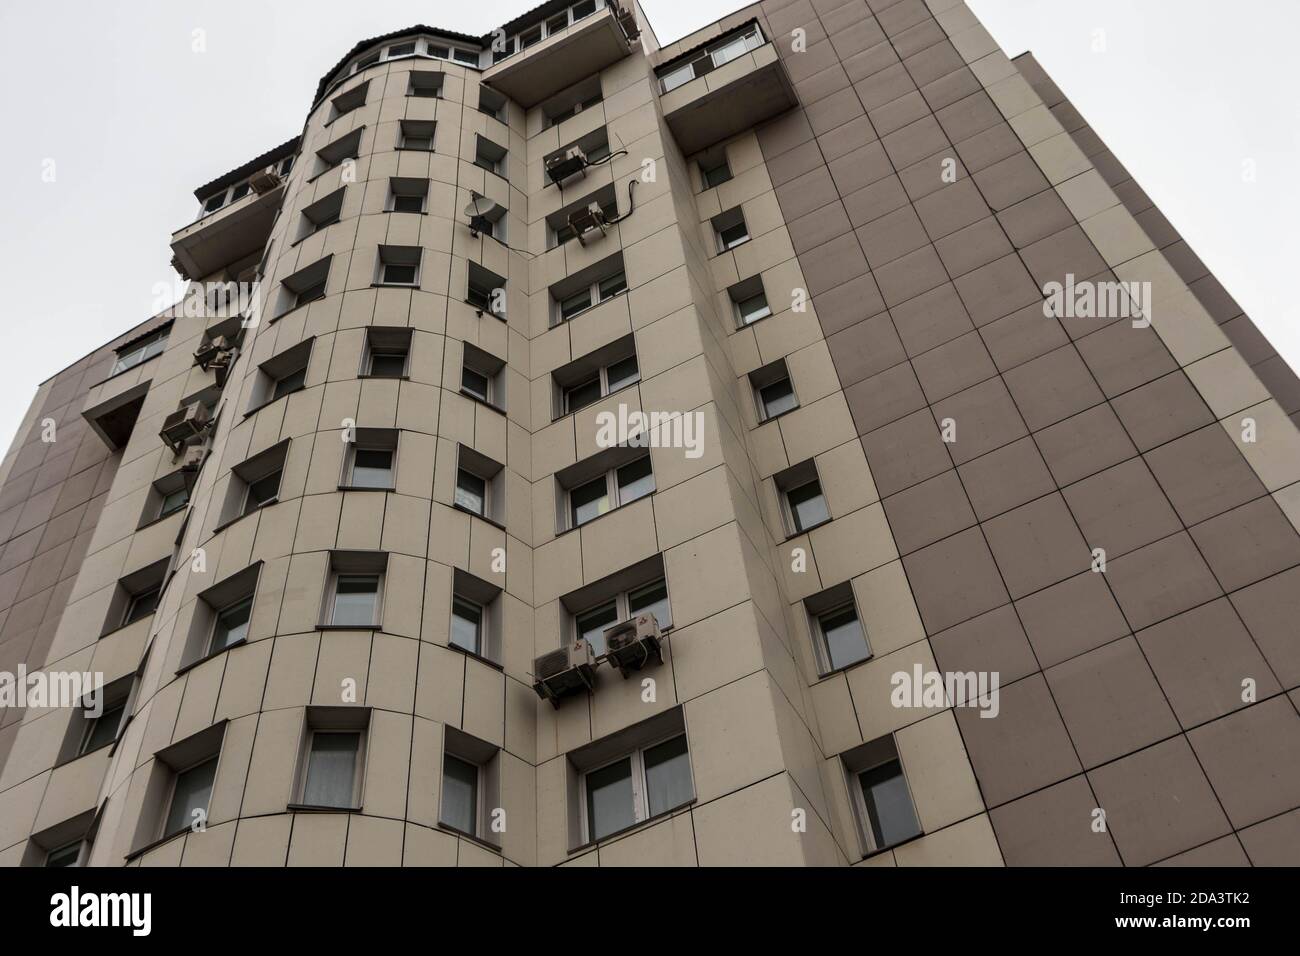 Urban architecture, a tall residential building against the sky. Stock Photo